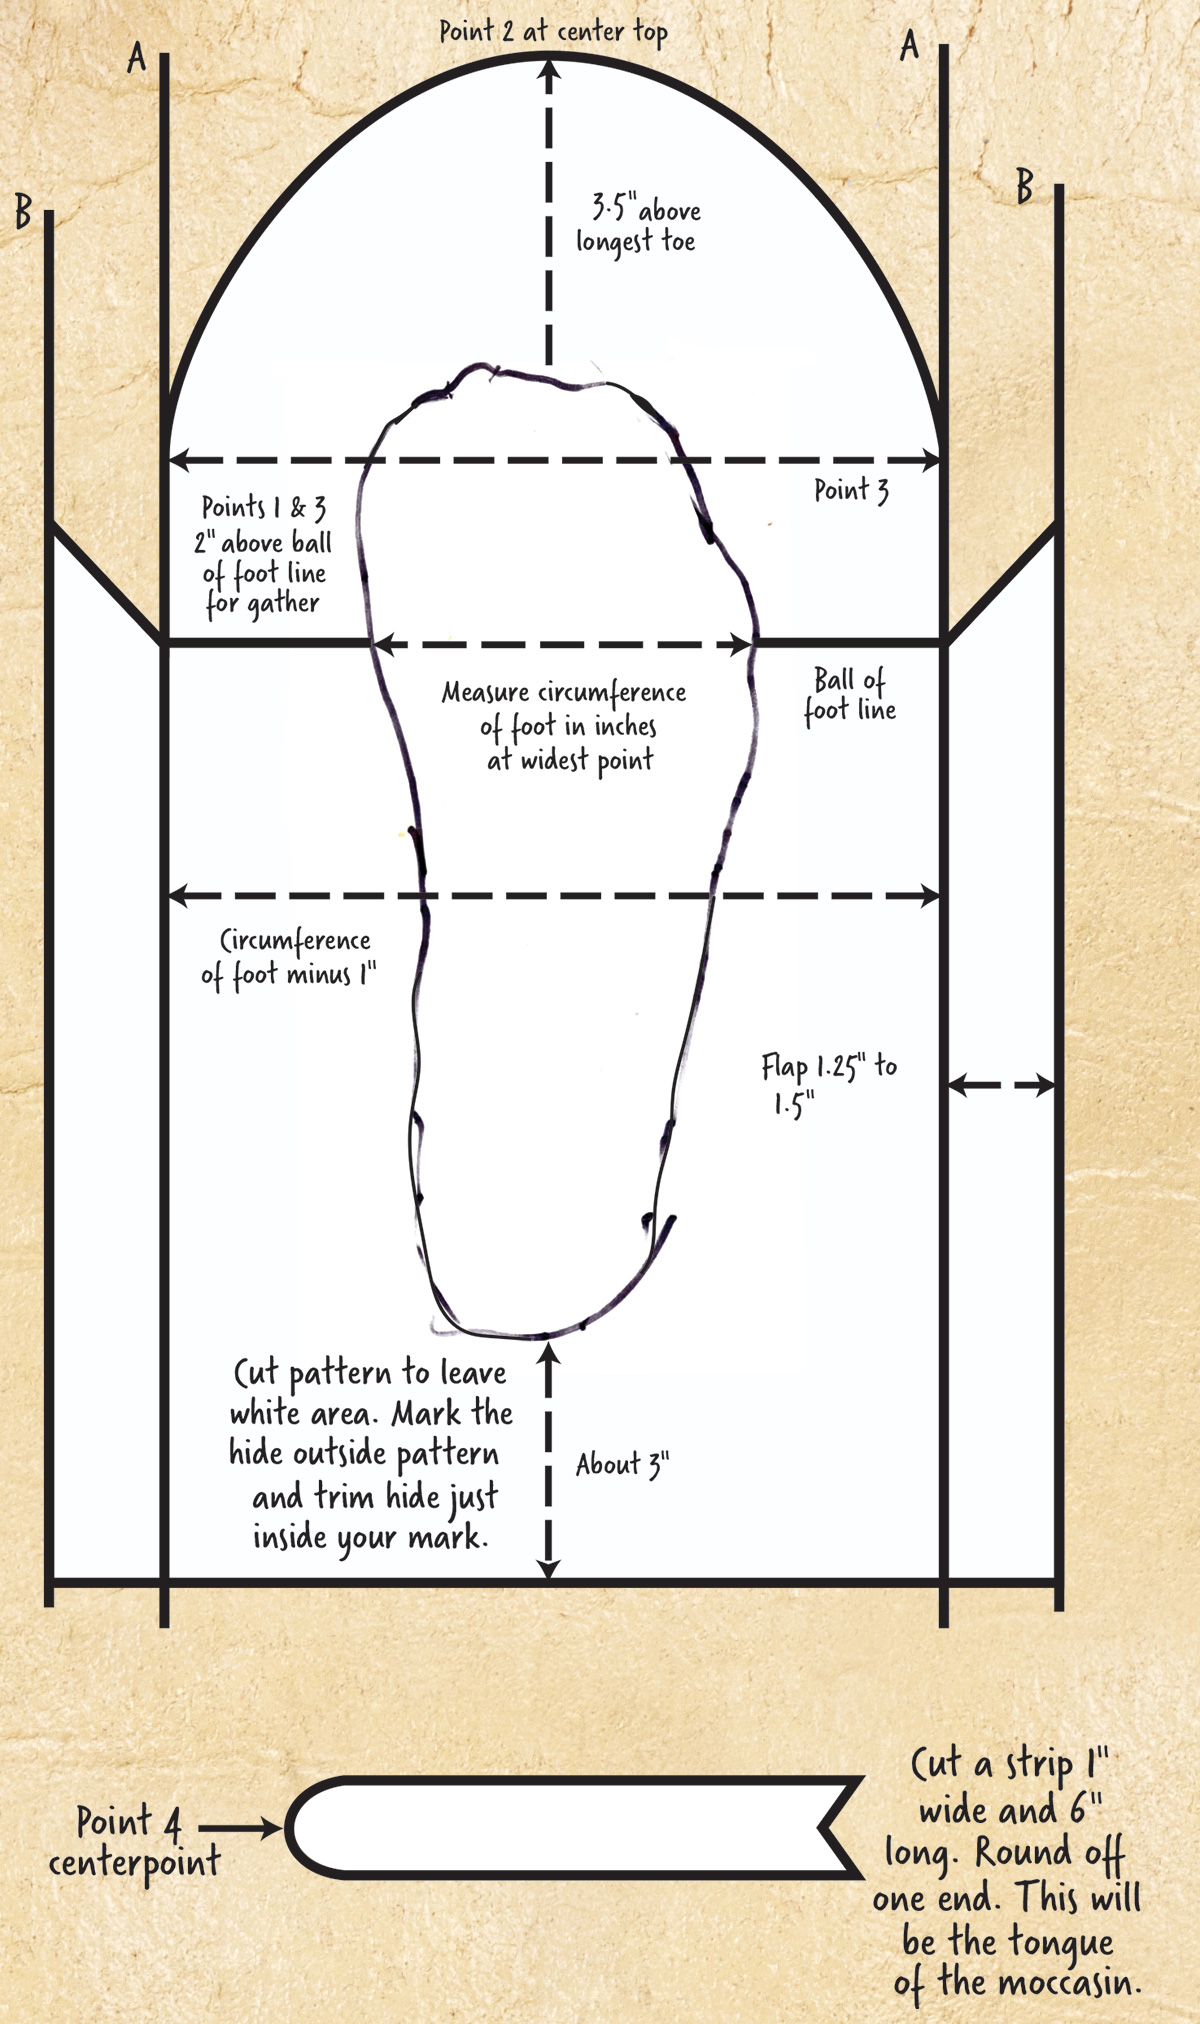 Making Your Own Moccasins | vlr.eng.br